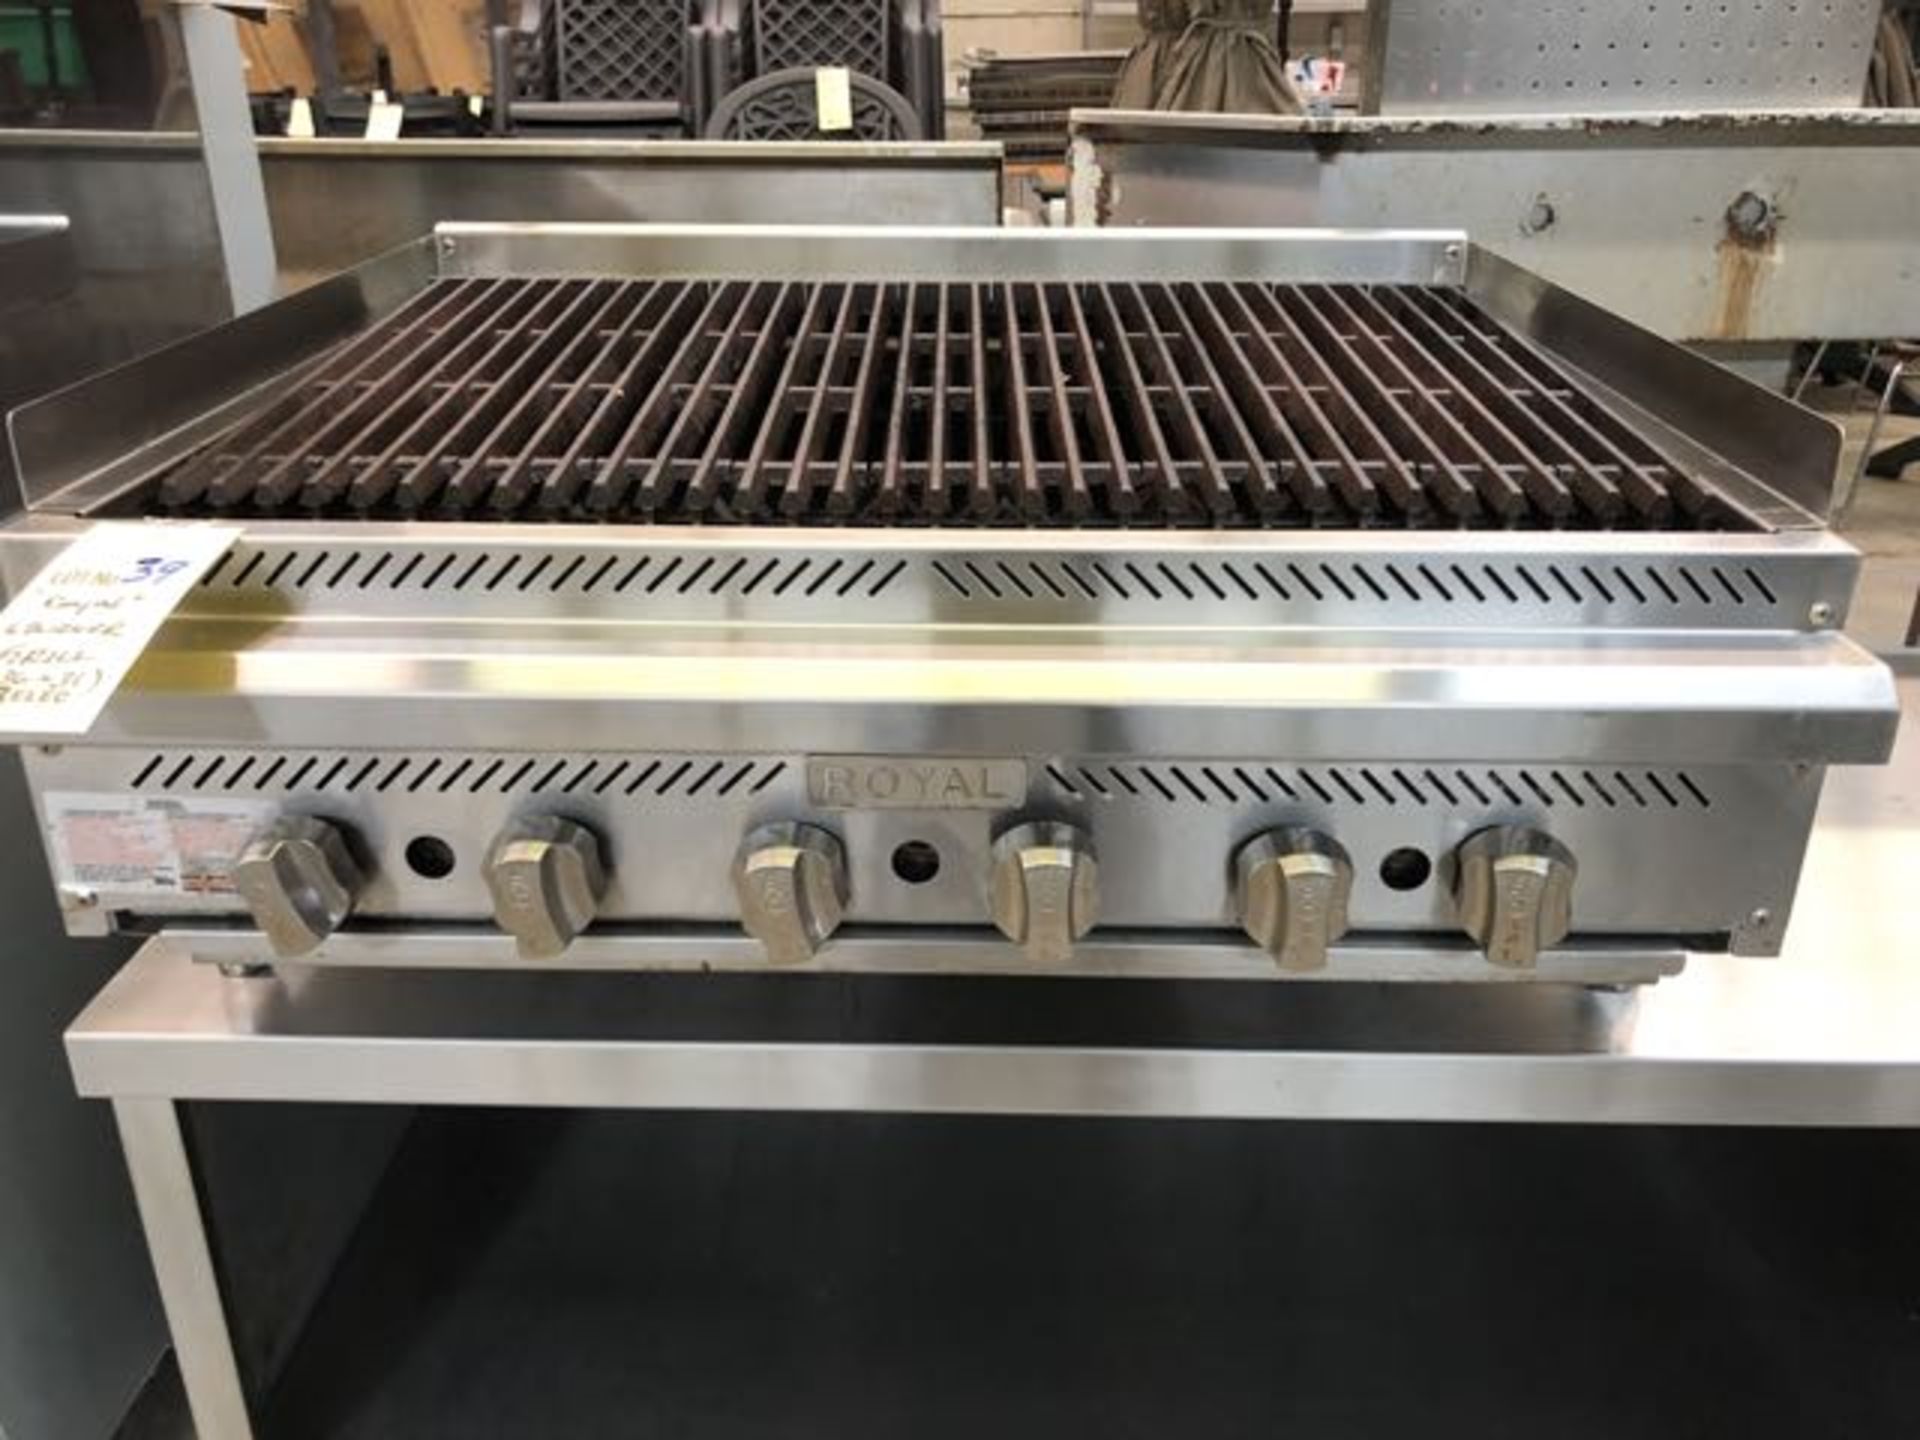 ROYAL 6 ronds Grille 36 x 31" - Image 2 of 3